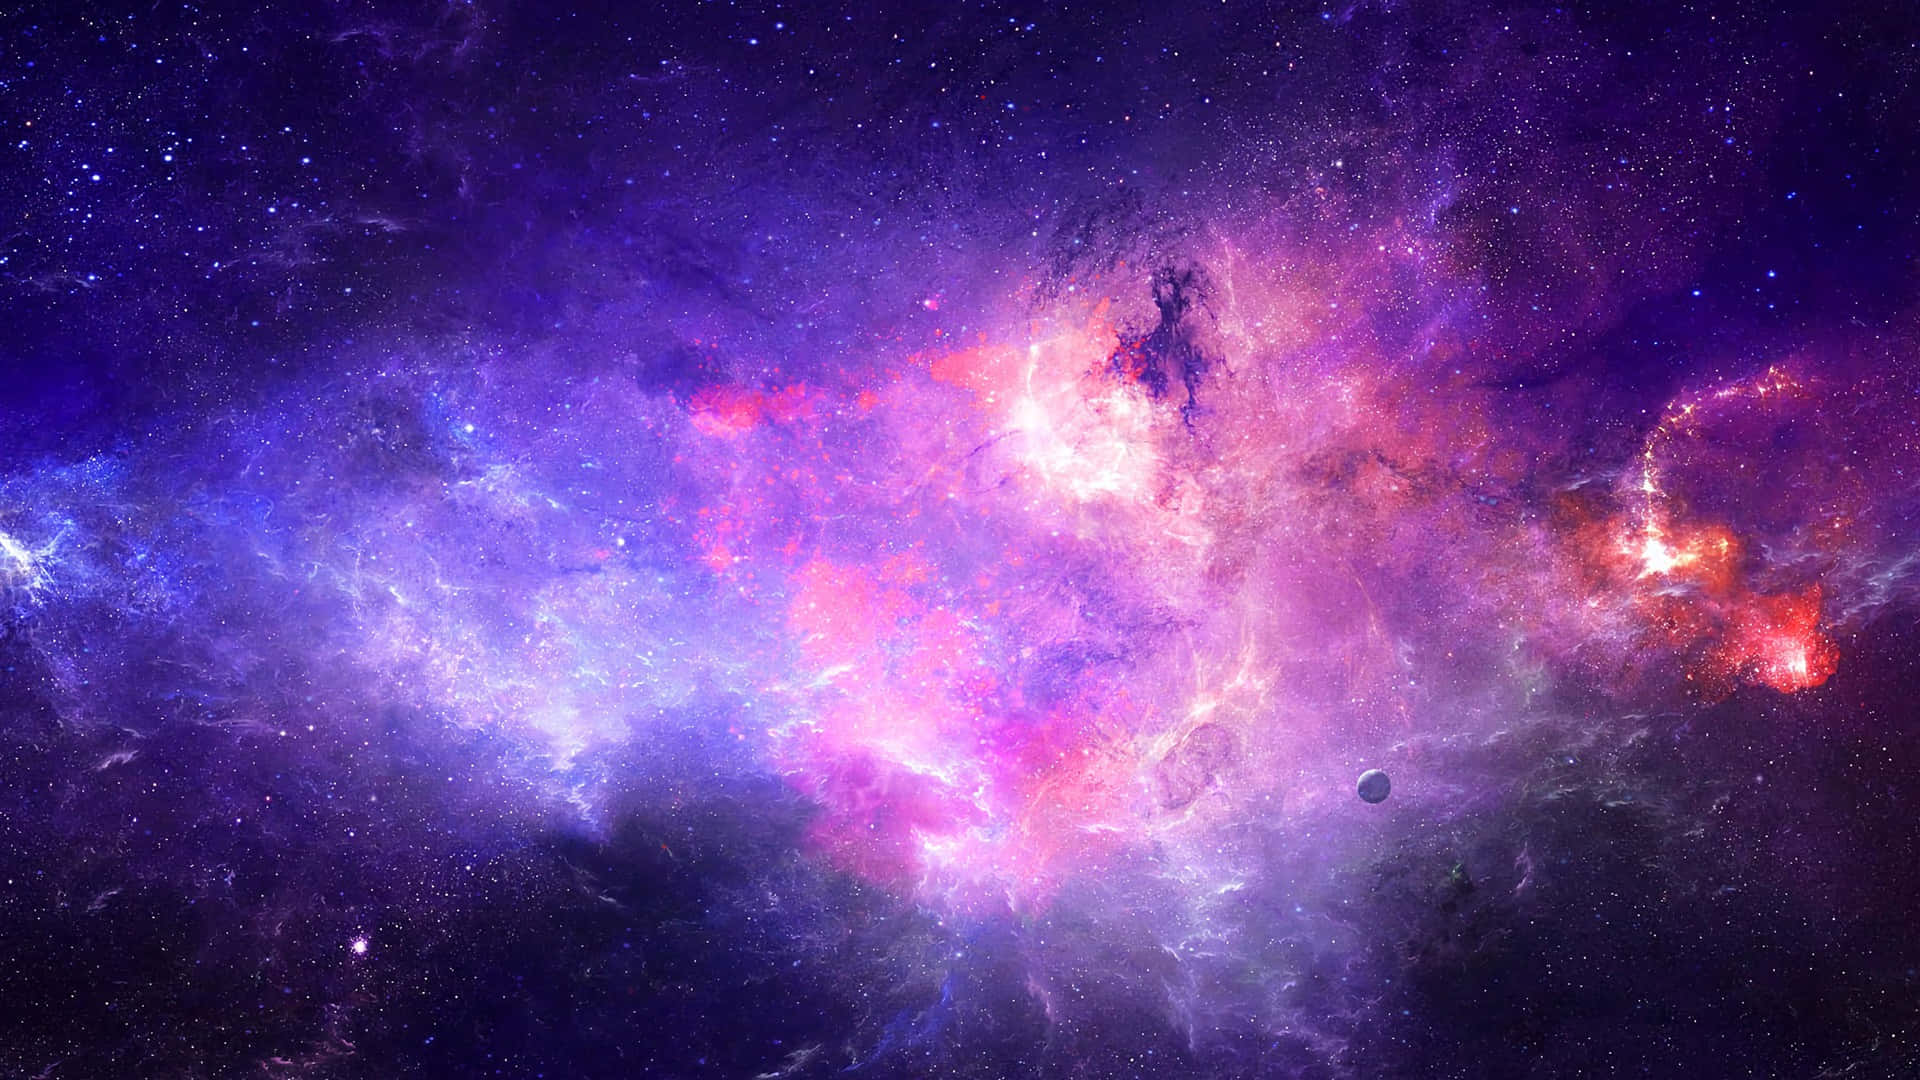 Stunning Galaxy Poster - Astronomical Wonder in the Cosmos Wallpaper